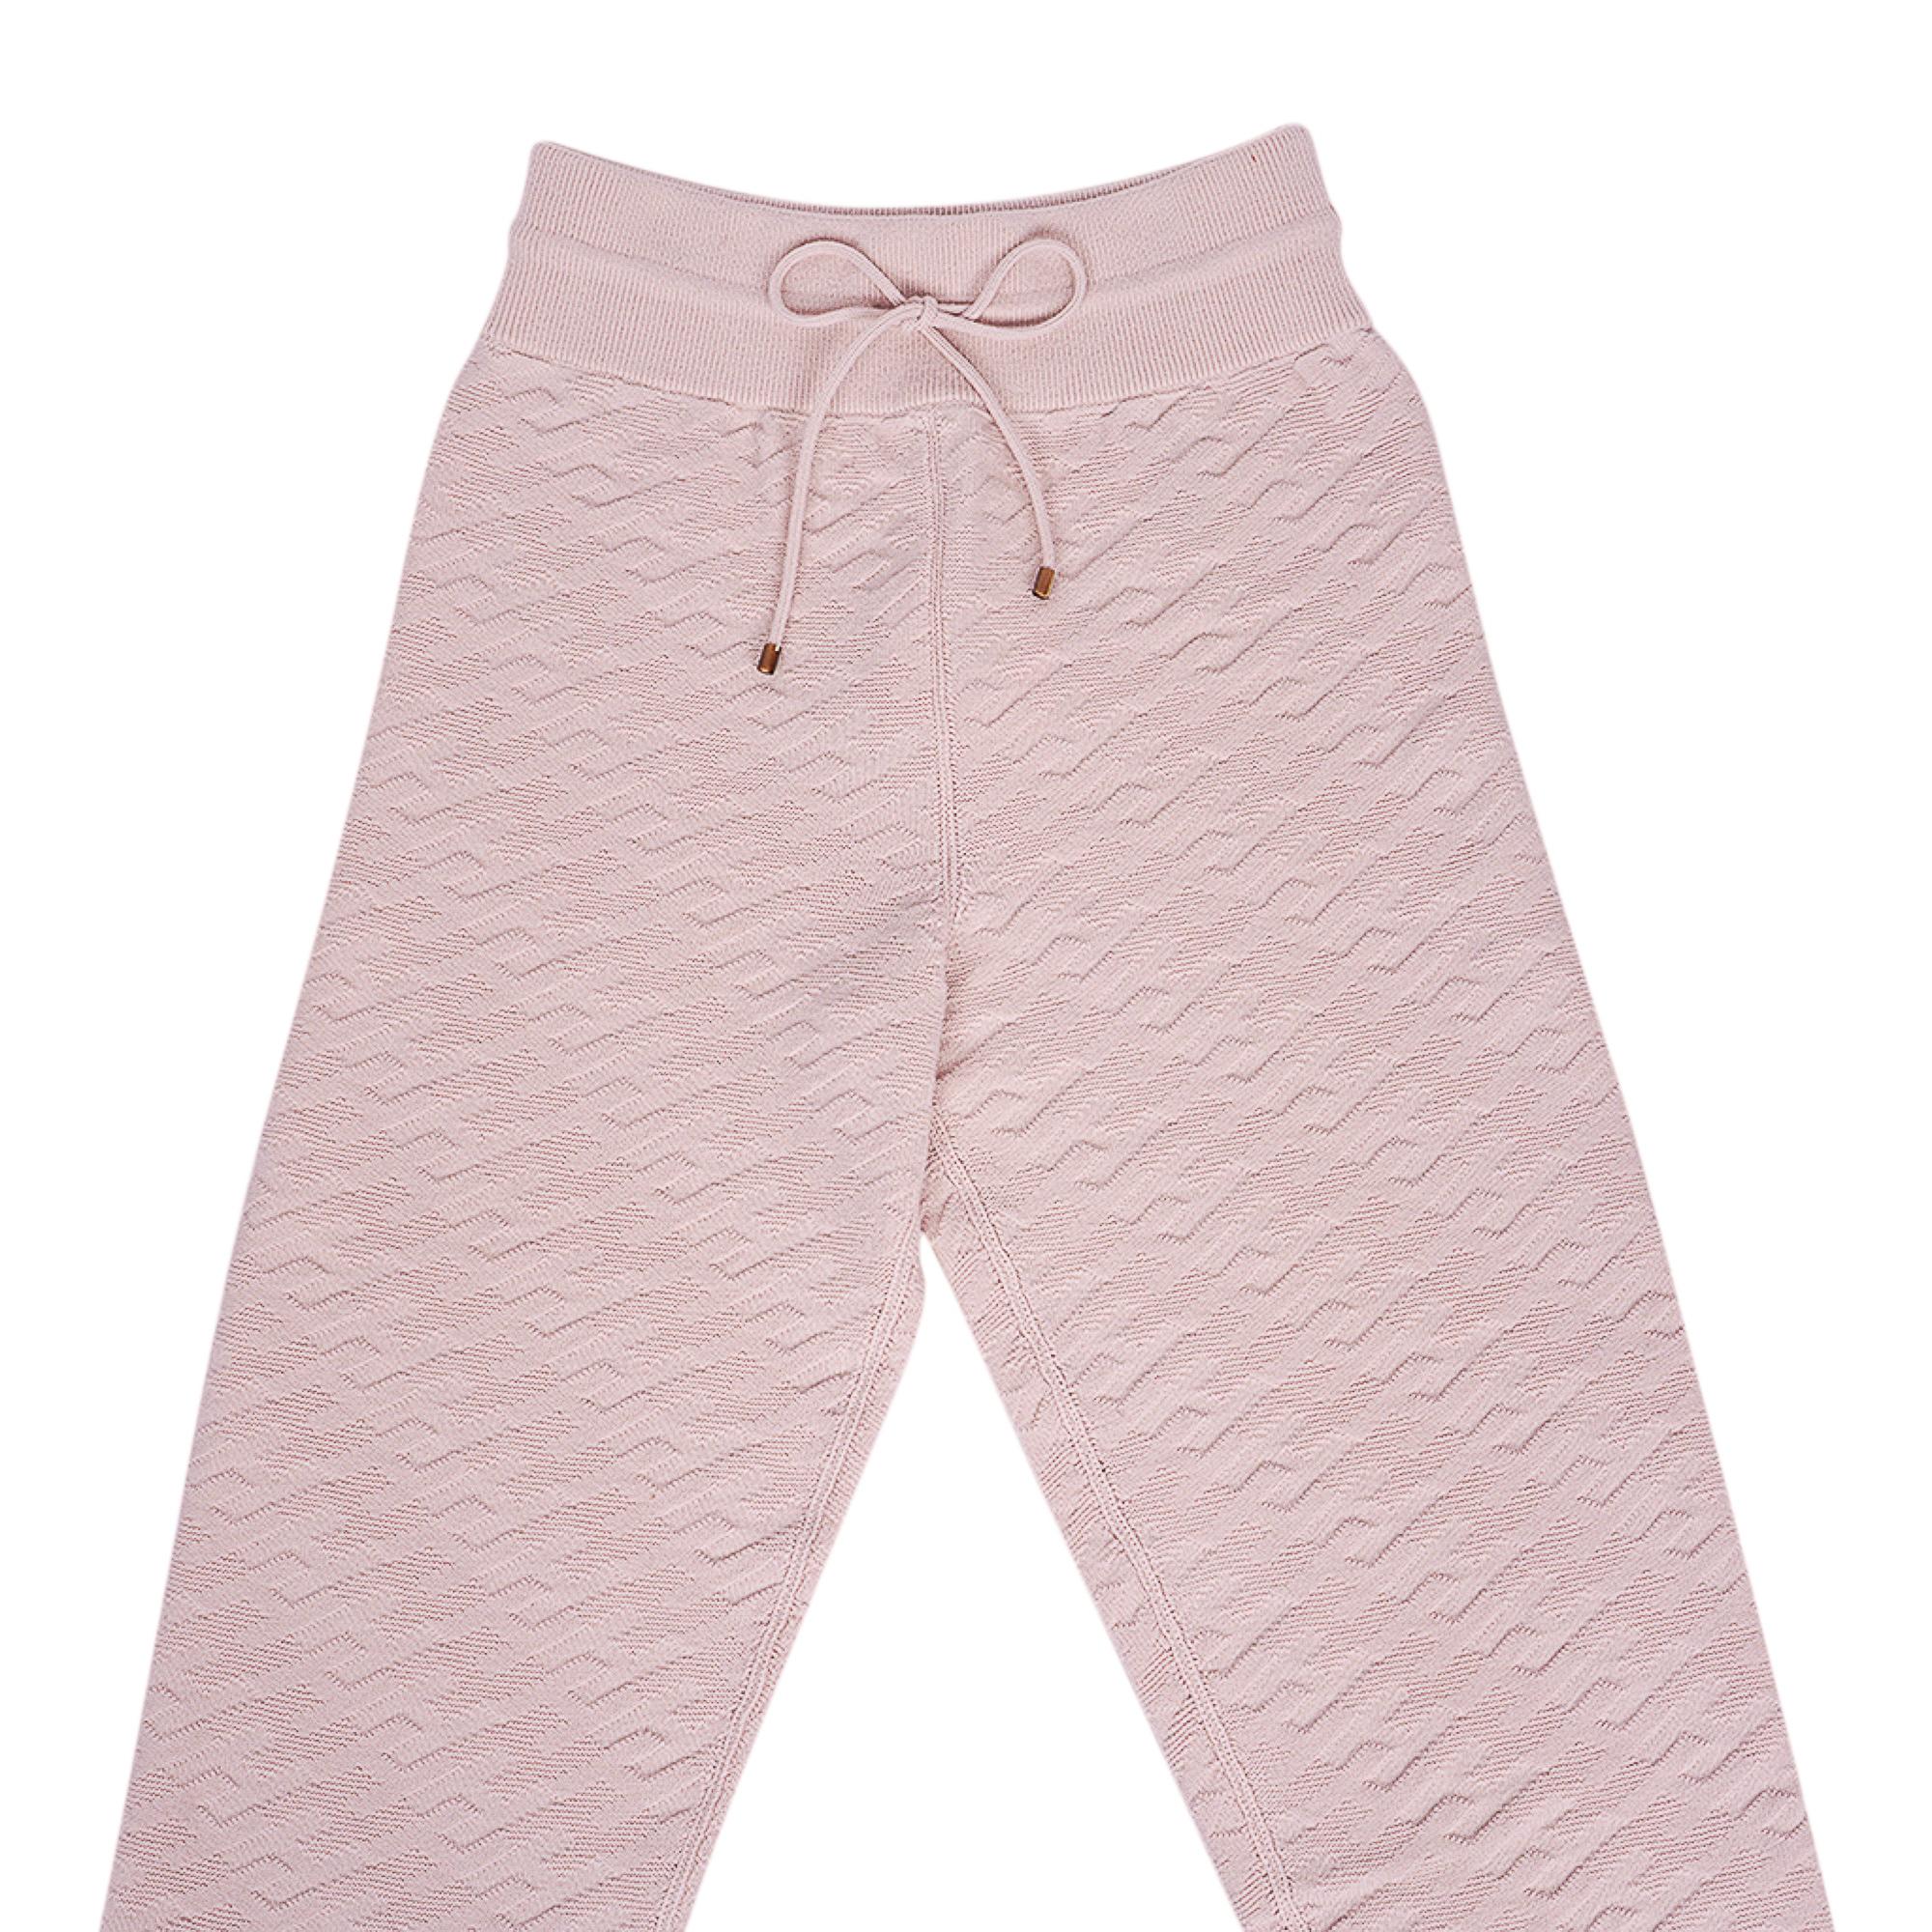 Mightychic offers an Hermes Jogging Pant featured in Rose Petale
Loungewear Voyage wool knit in the palest rose with embossed H throughout.
Drawstring waist.
Horn tipped cord.
Made in Italy.
Has matching sweater - this listing is only for the